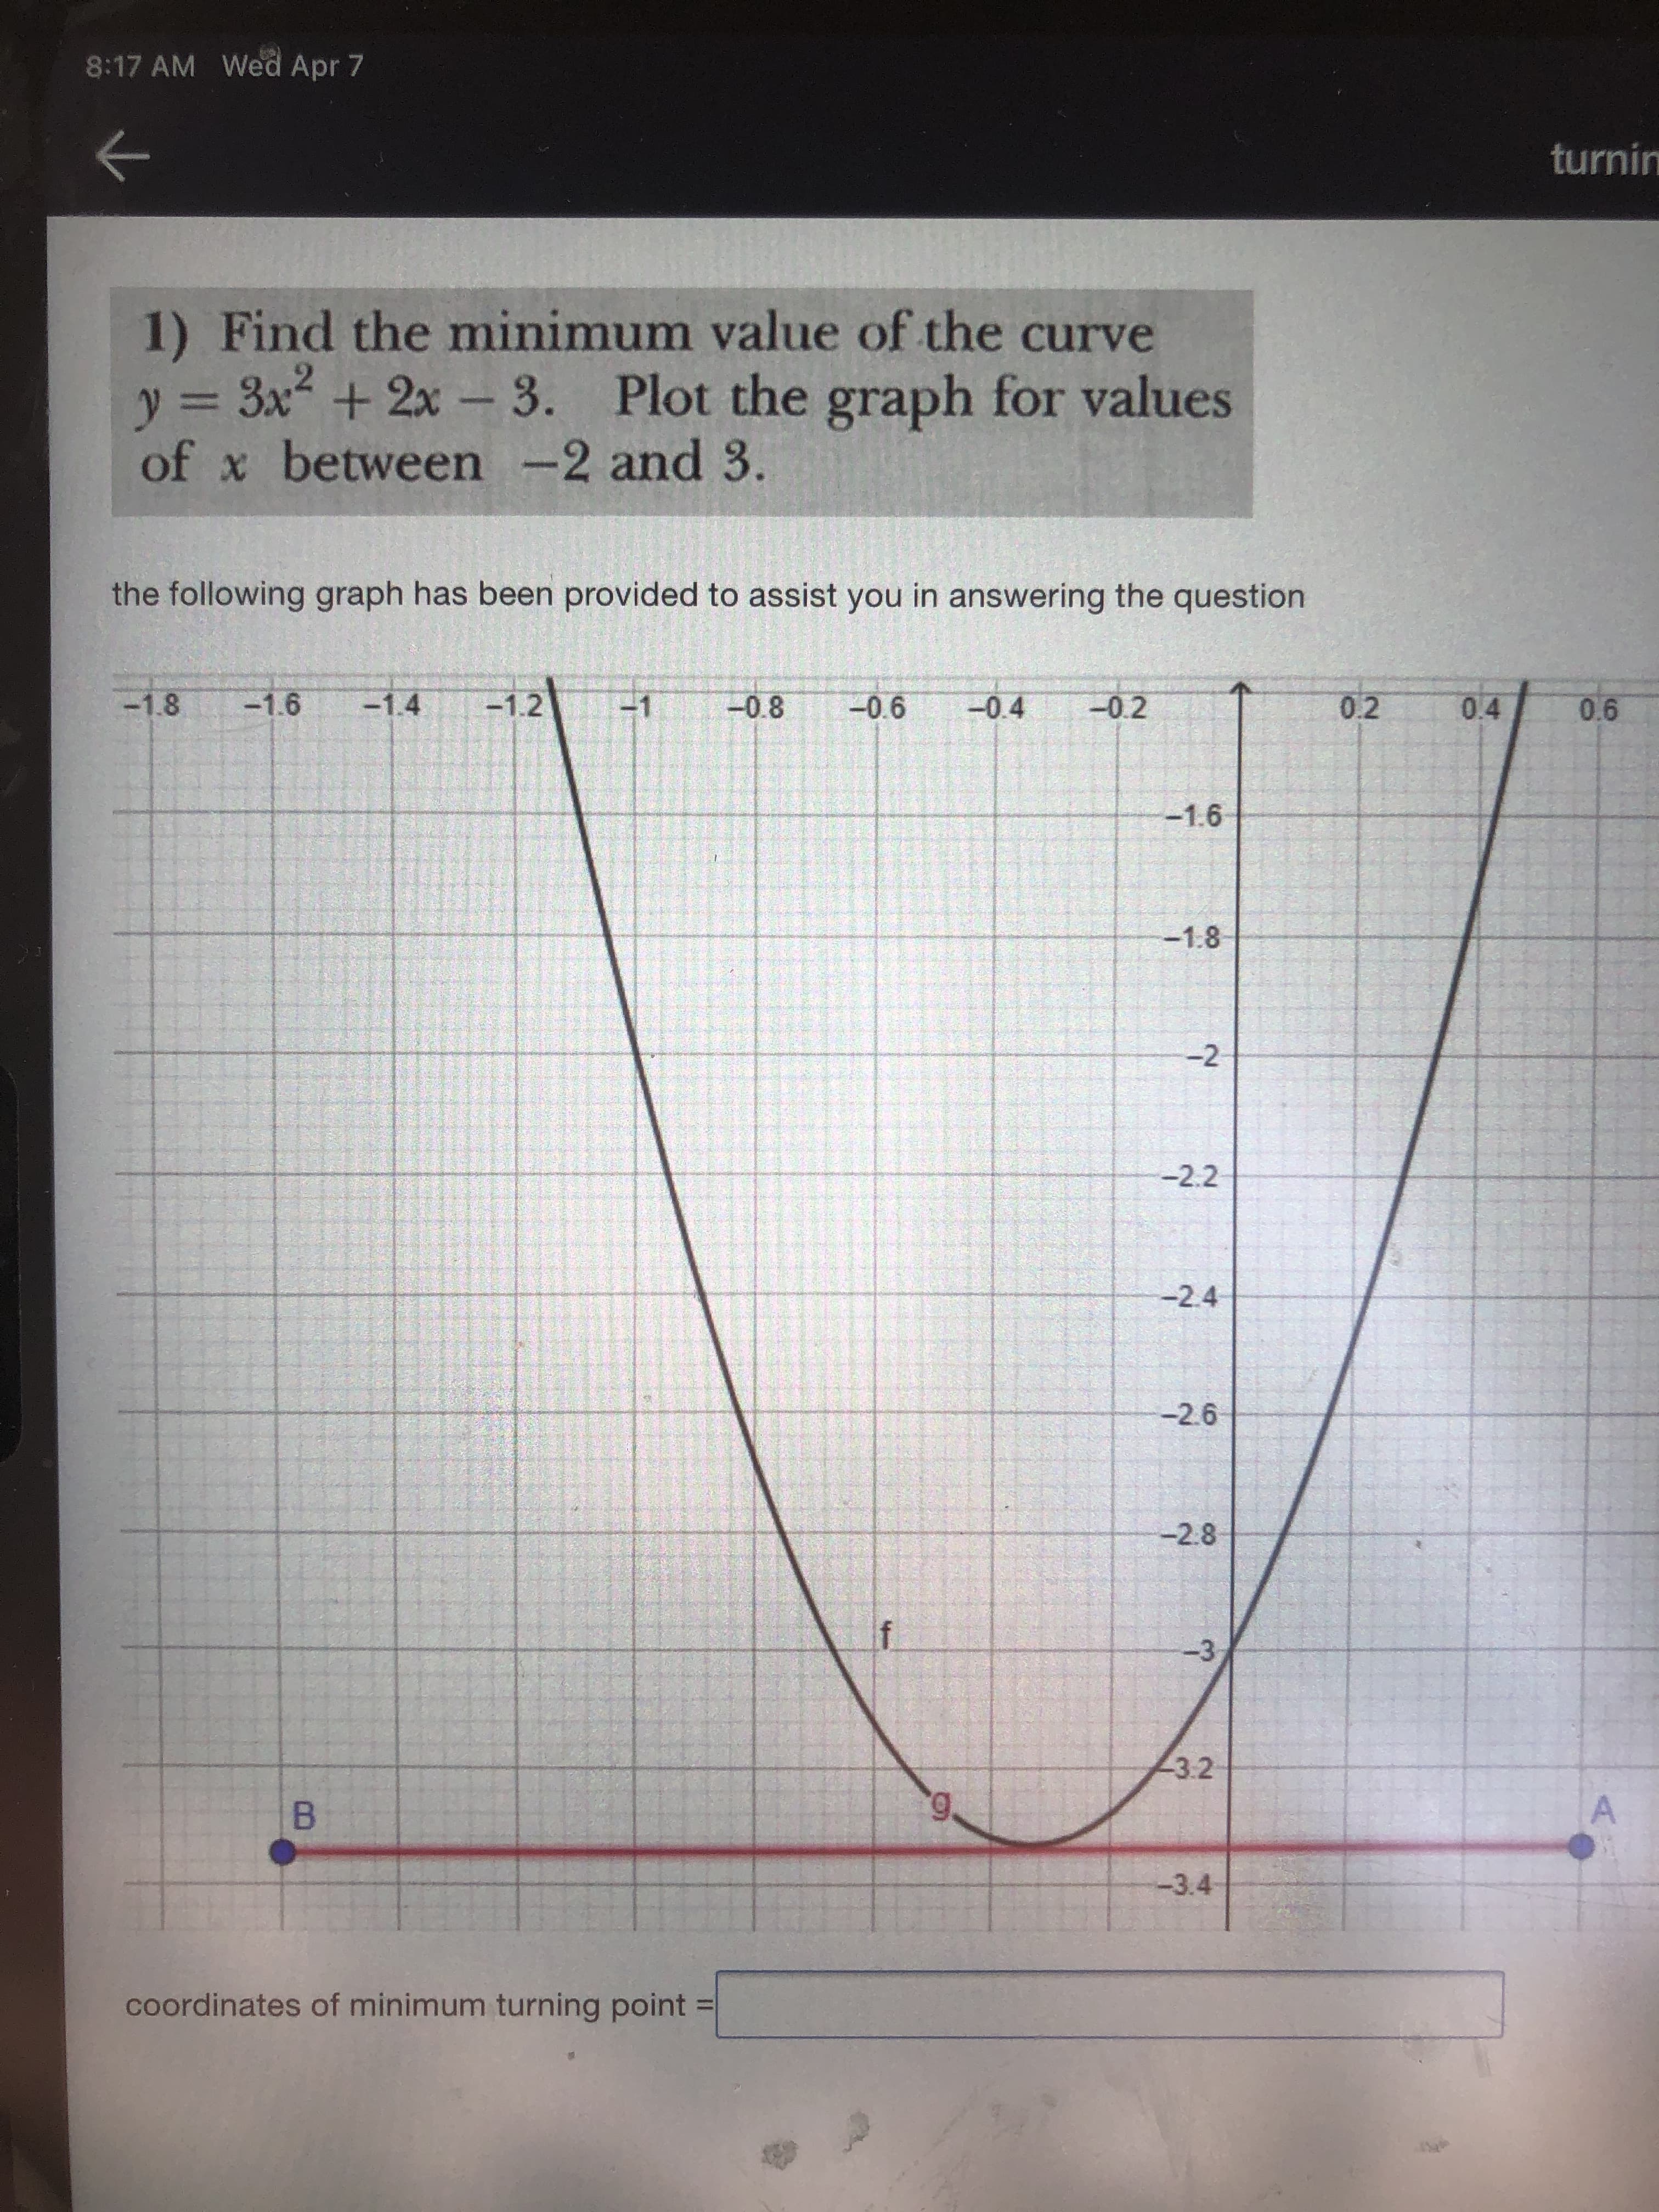 1) Find the minimum value of the curve
y = 3x + 2x - 3. Plot the graph for values
of x between -2 and 3.
